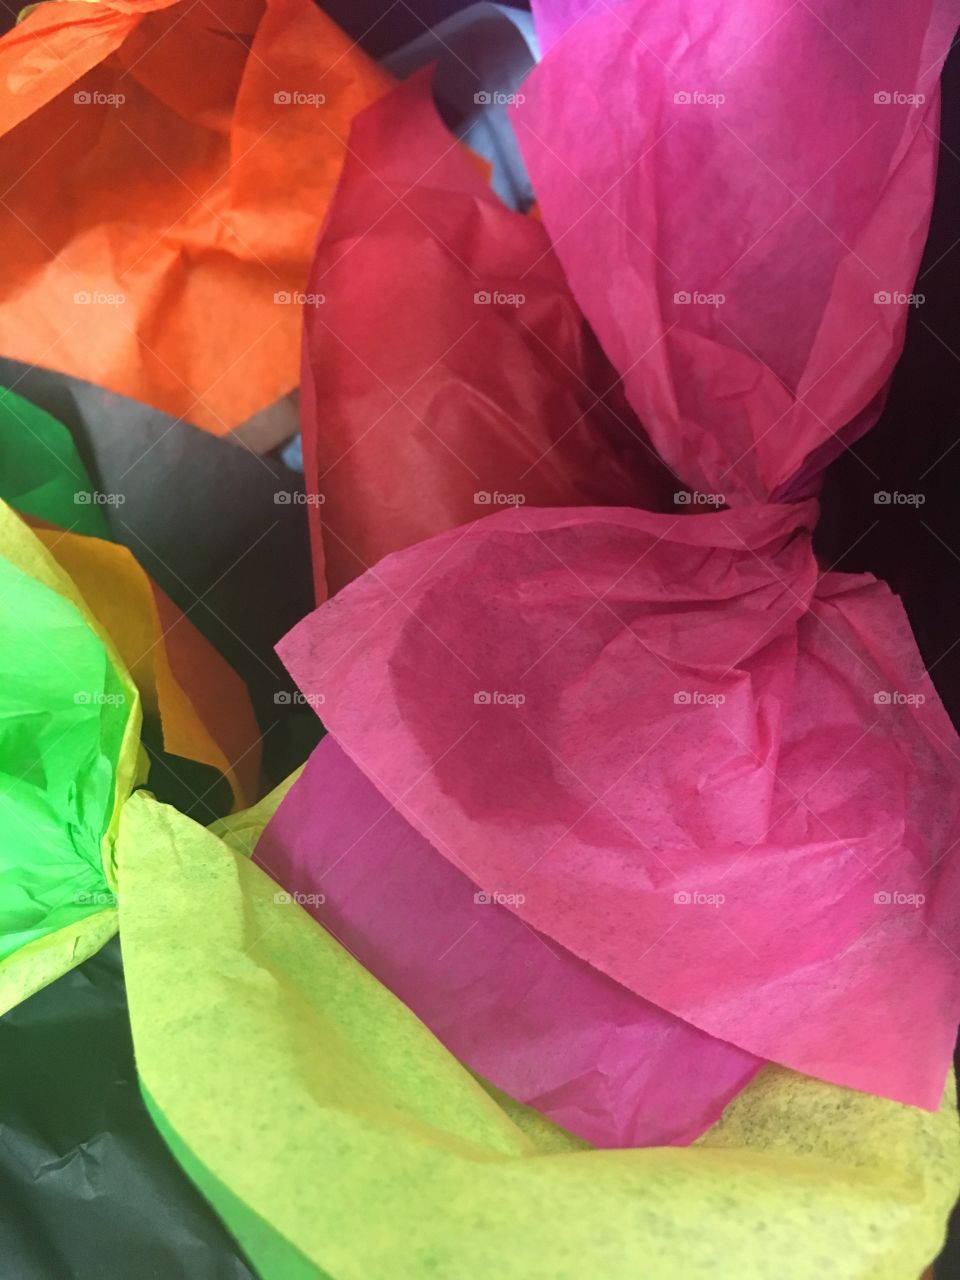 Pieces of craft tissue paper ready to make paper flowers.  Colors include pink, red, orange, green, and yellow.  